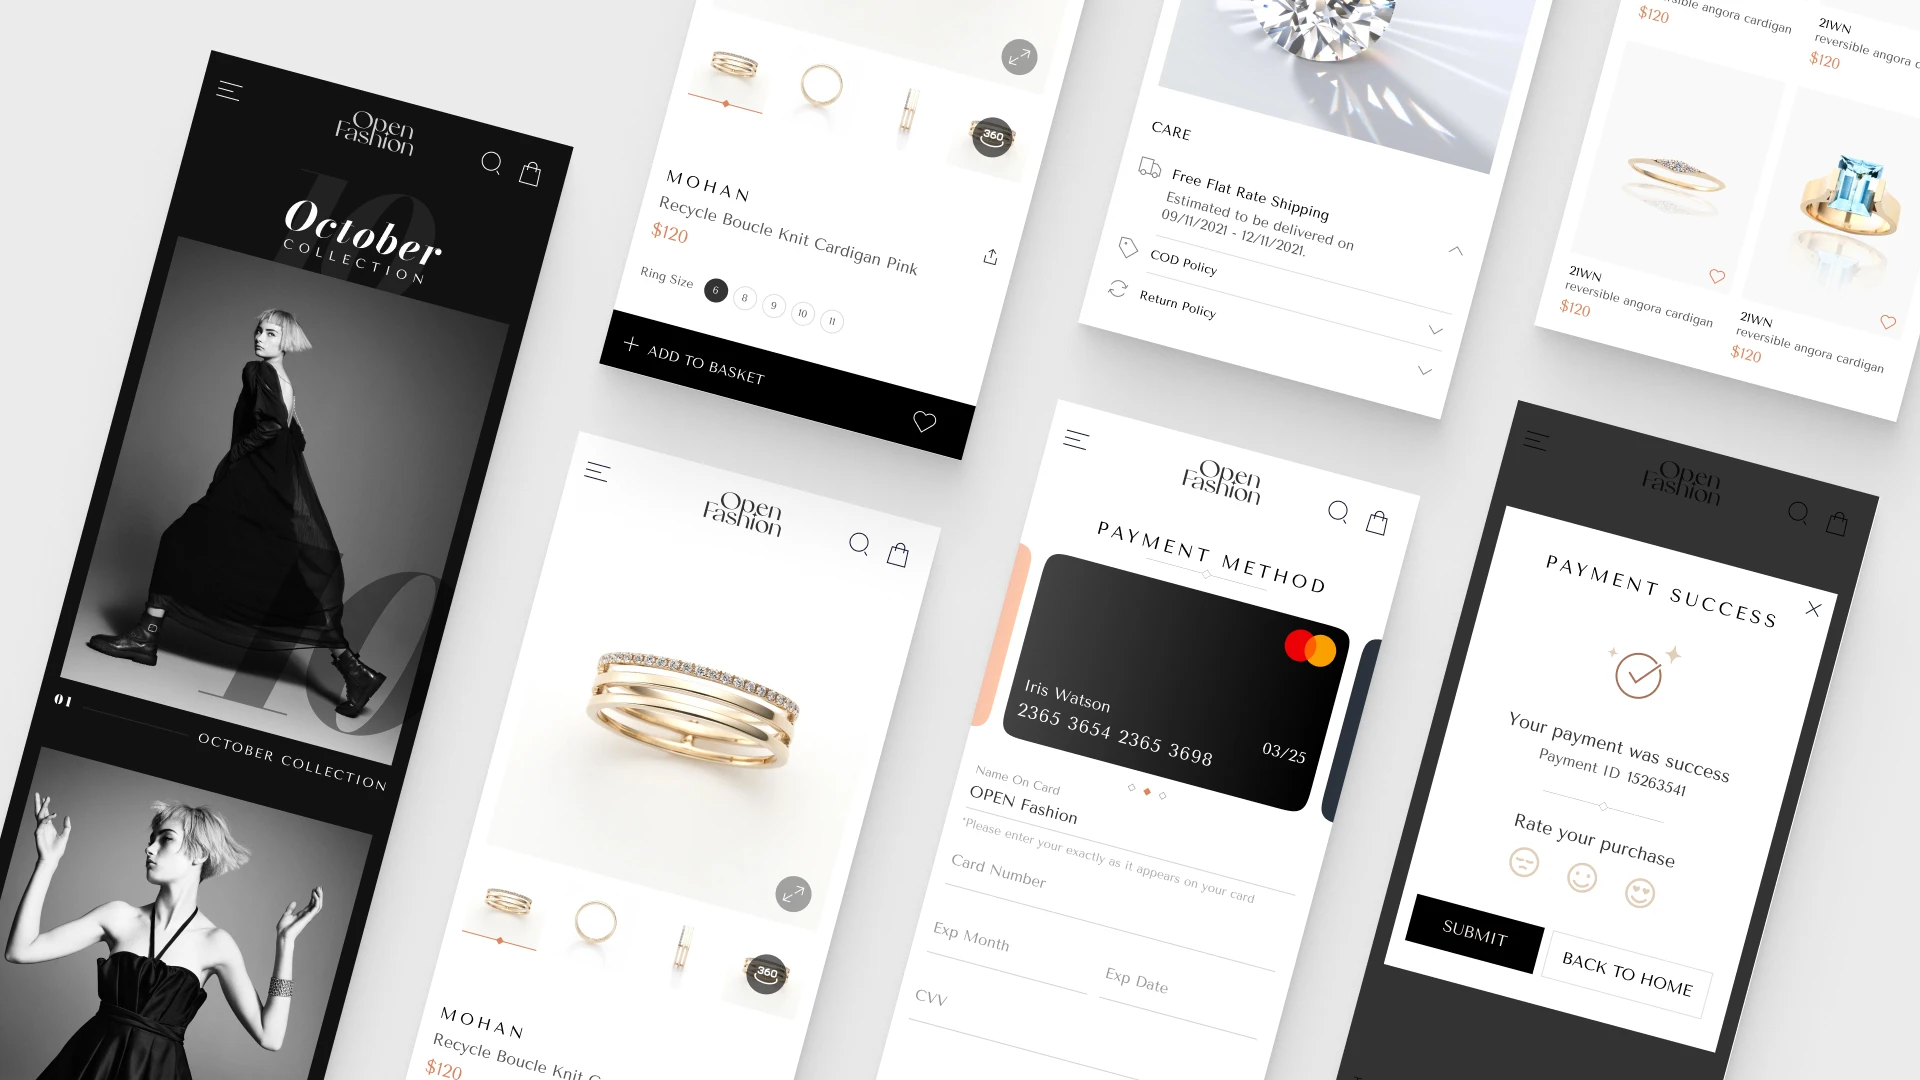 Open Fashion - Free eCommerce UI Kit for Figma - Free UI Kit with elegant and modern style will help you to quickly create your own design. Come with 30 essential screens, Open Fashion free UI kit are perfect fit for designer, developer, startup to quick adapt design. Open Fashion support auto layout, variant components and free font.